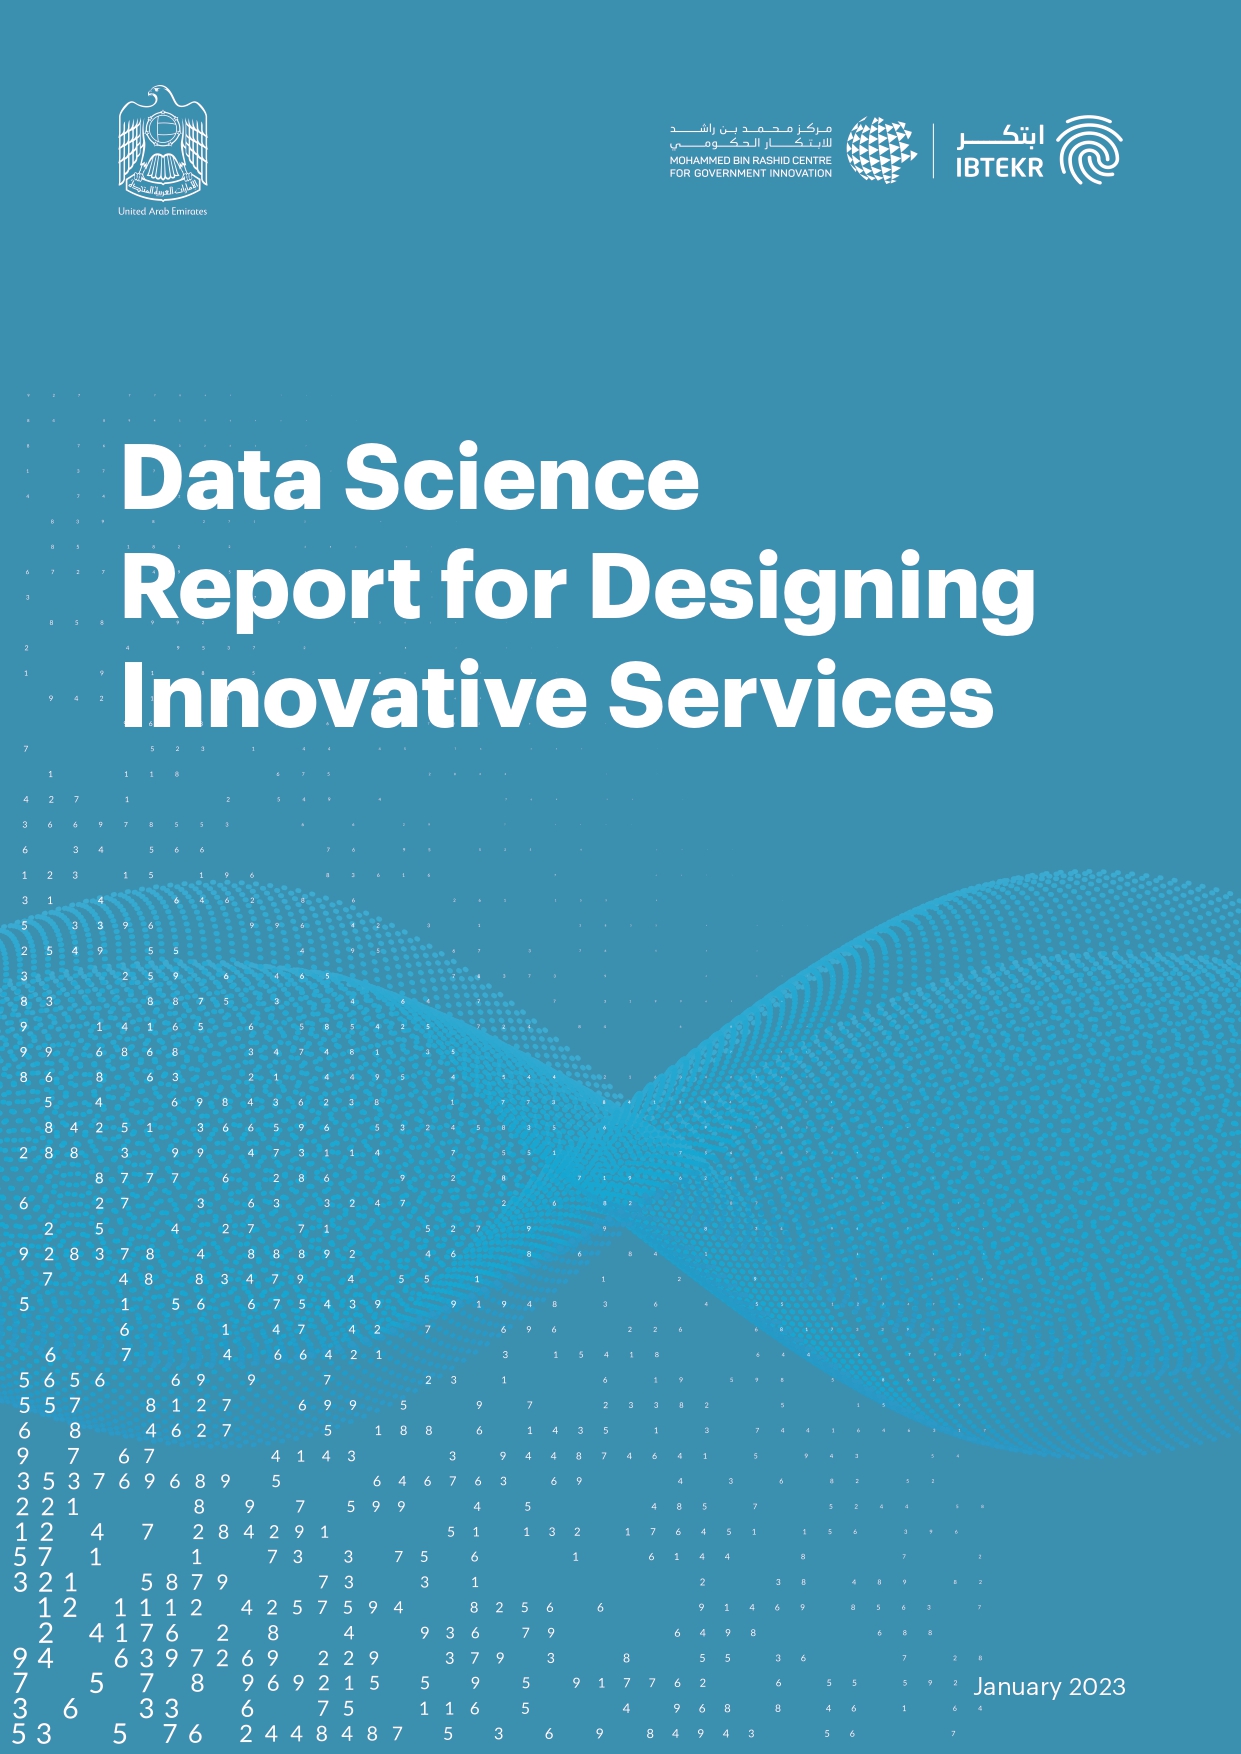 Data analysis for designing innovative services